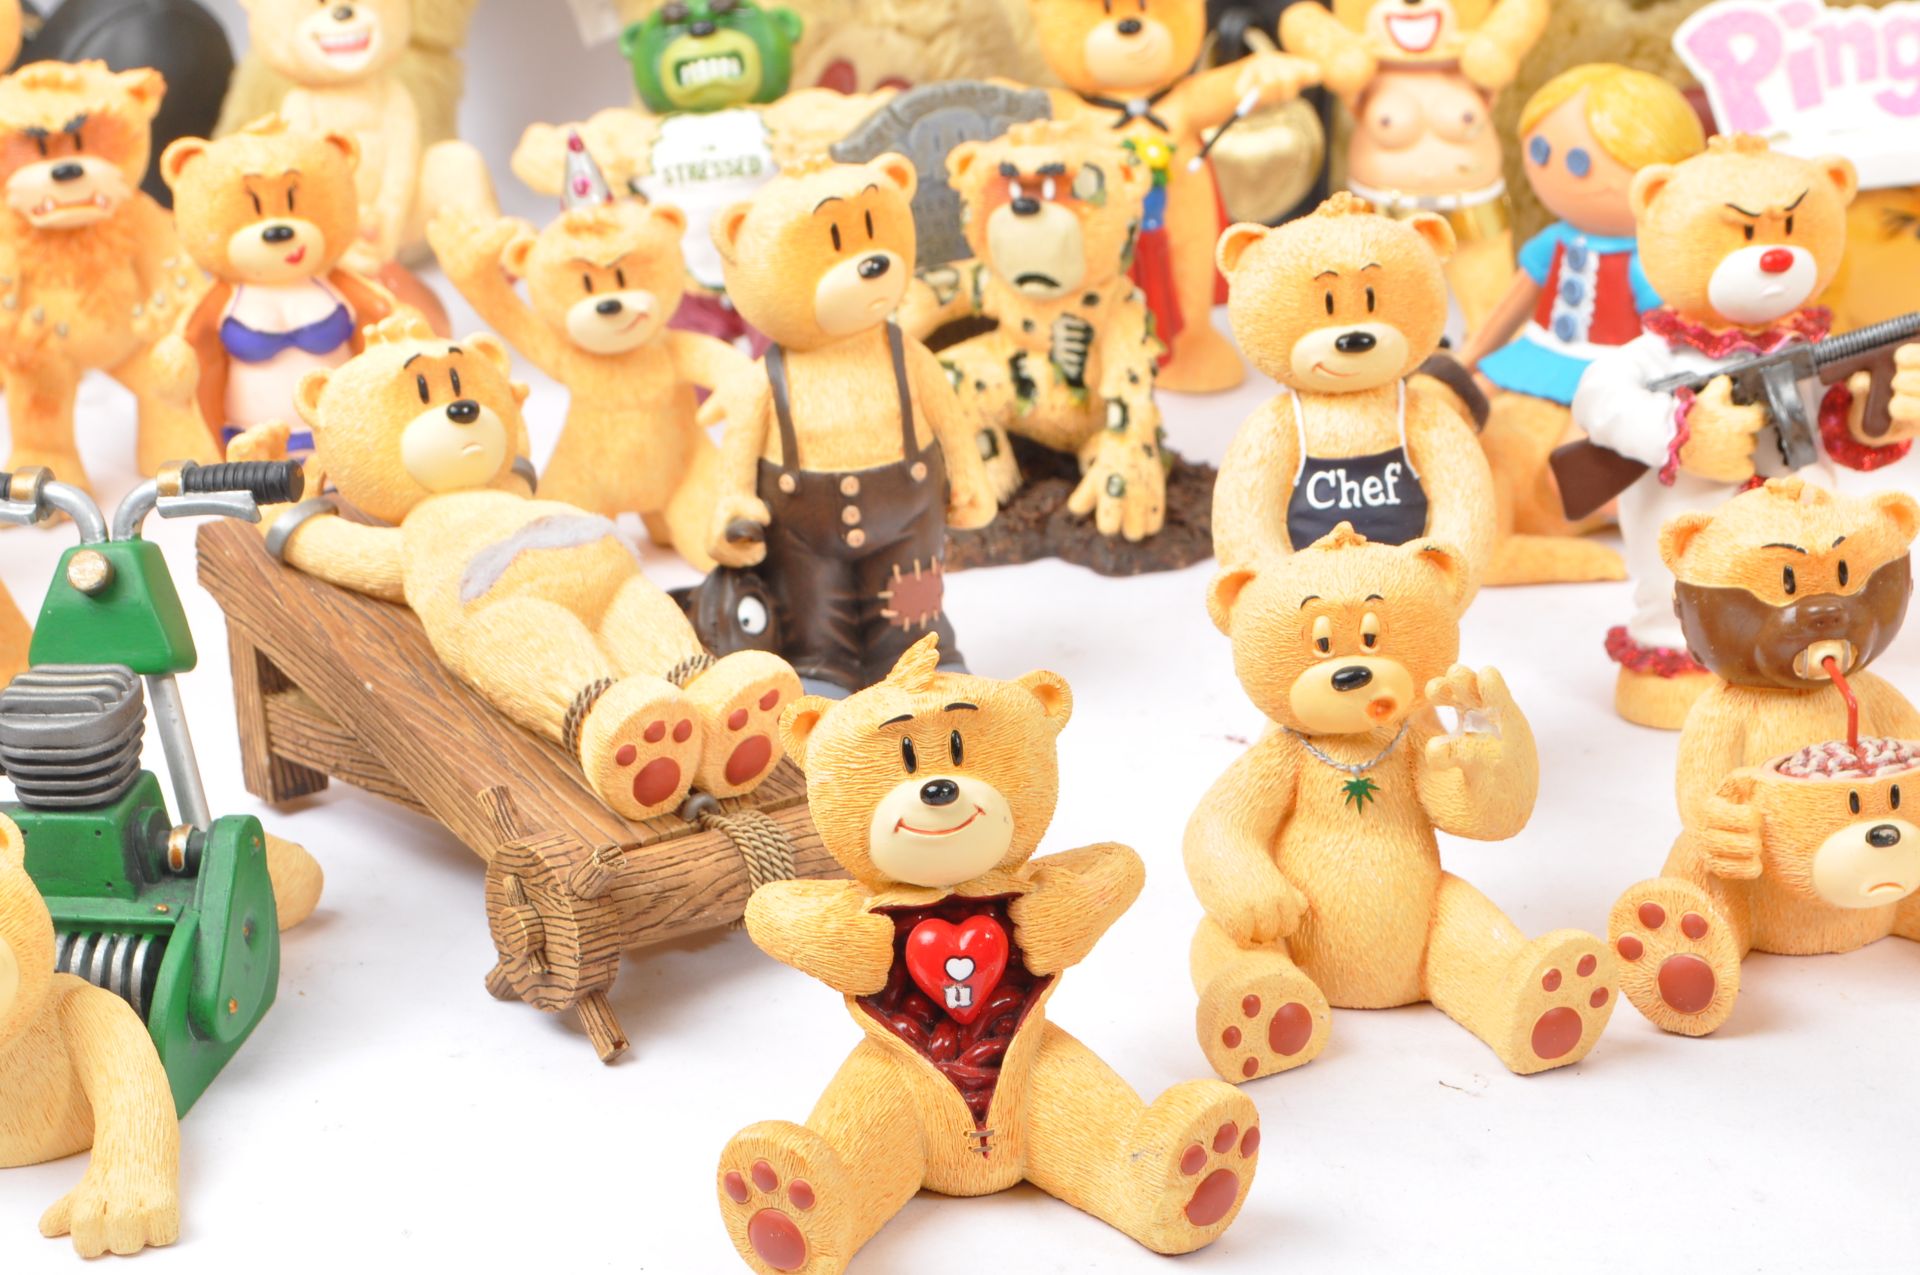 LARGE COLLECTION OF BAD TASTE BEARS FIGURINES - Image 3 of 12